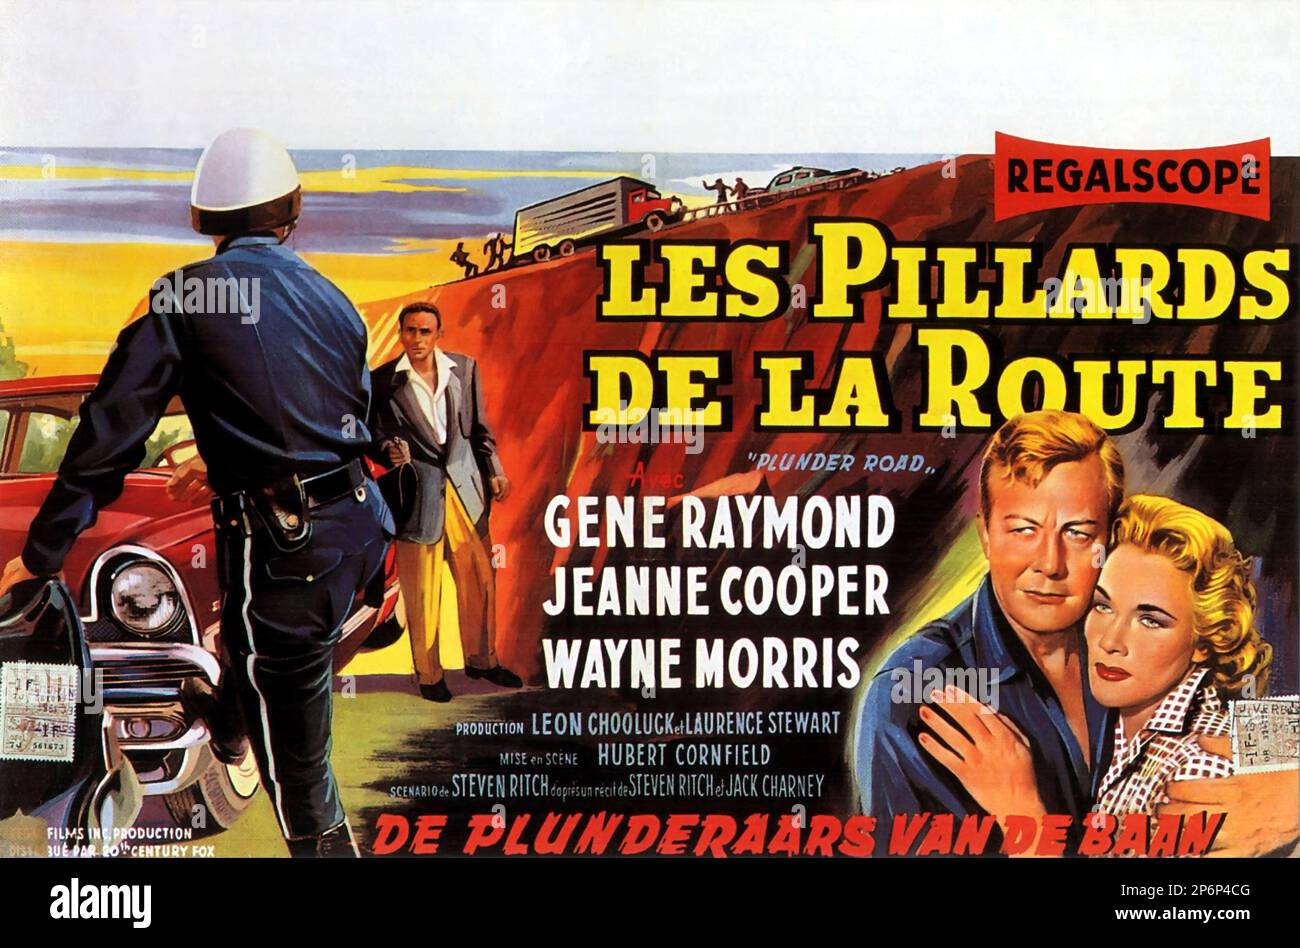 1957 : The FILM NOIR  movie  PLUNDER ROAD  by Hubert Cornfield , with  Gene Raimond , Jeanne Cooper and Wayne Morris, from a novel by Steven Ritch and Jack Charney . Advertising poster from Belgium - FILM - CINEMA   - poster pubblicitario - poster - advertising - locandina   ----  Archivio GBB Stock Photo